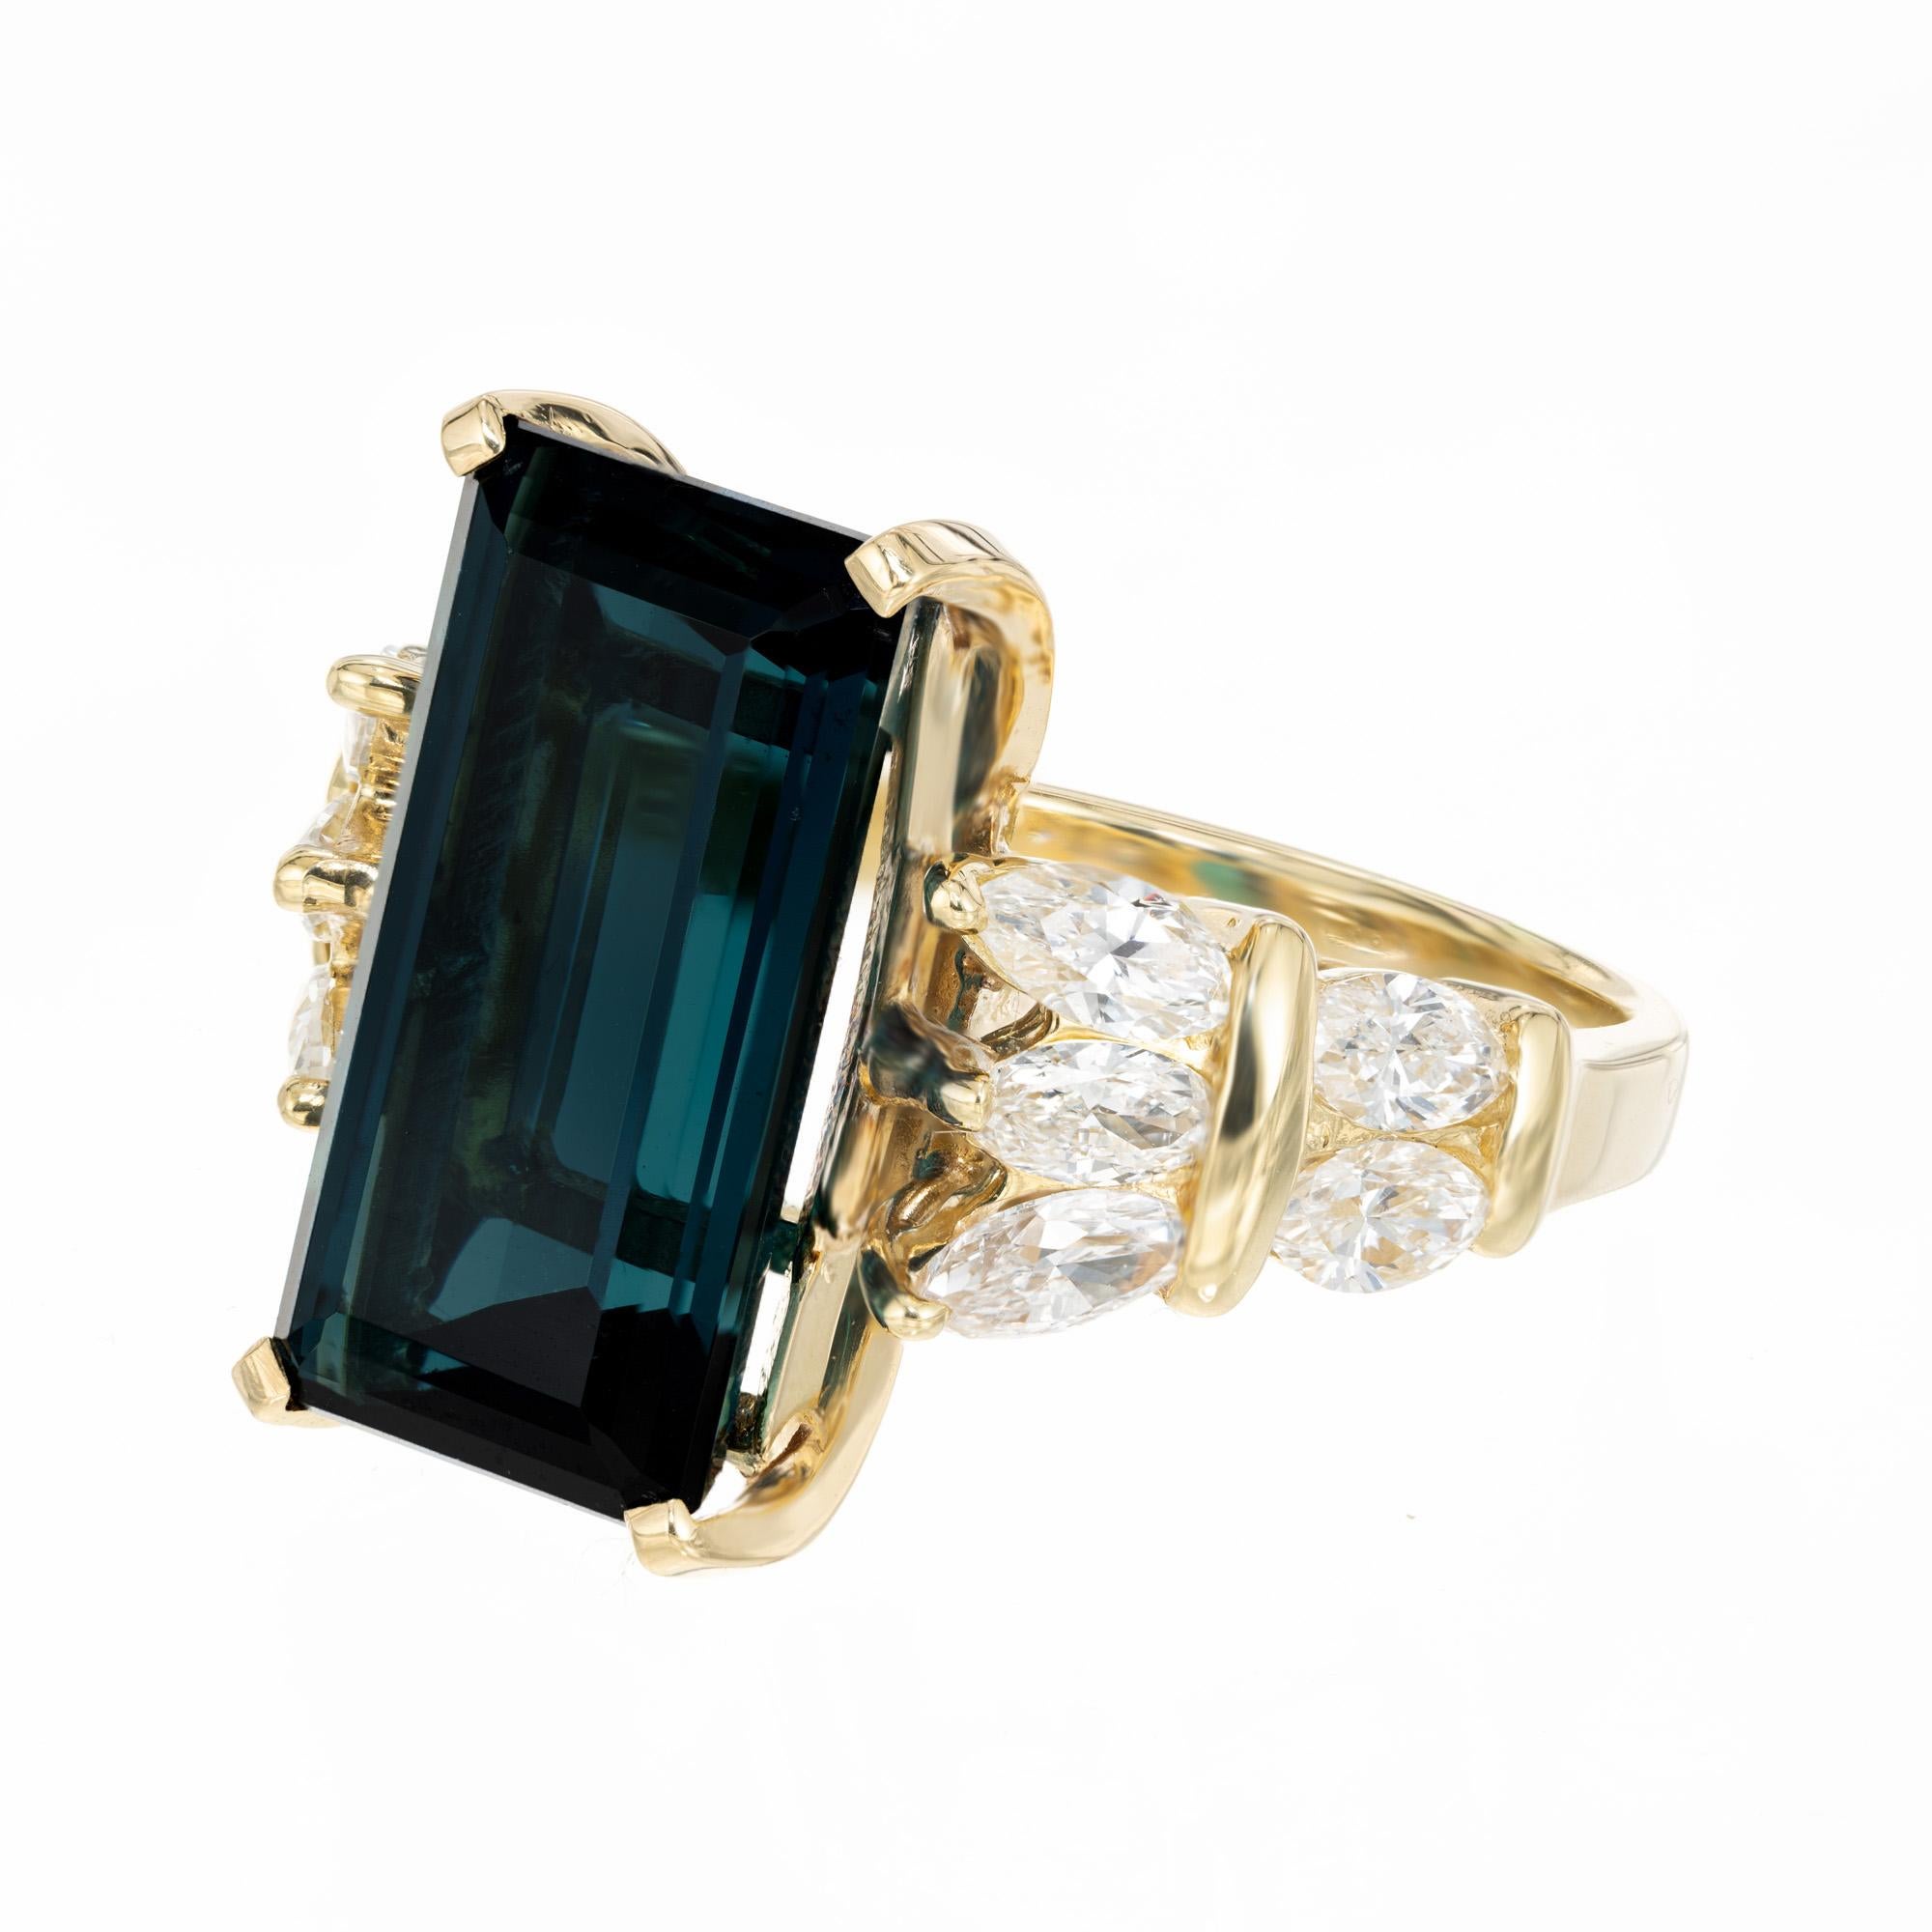 Emerald Cut 8.55 Carat Blue Indicolite Tourmaline Marquise Diamond Gold Cocktail Ring For Sale